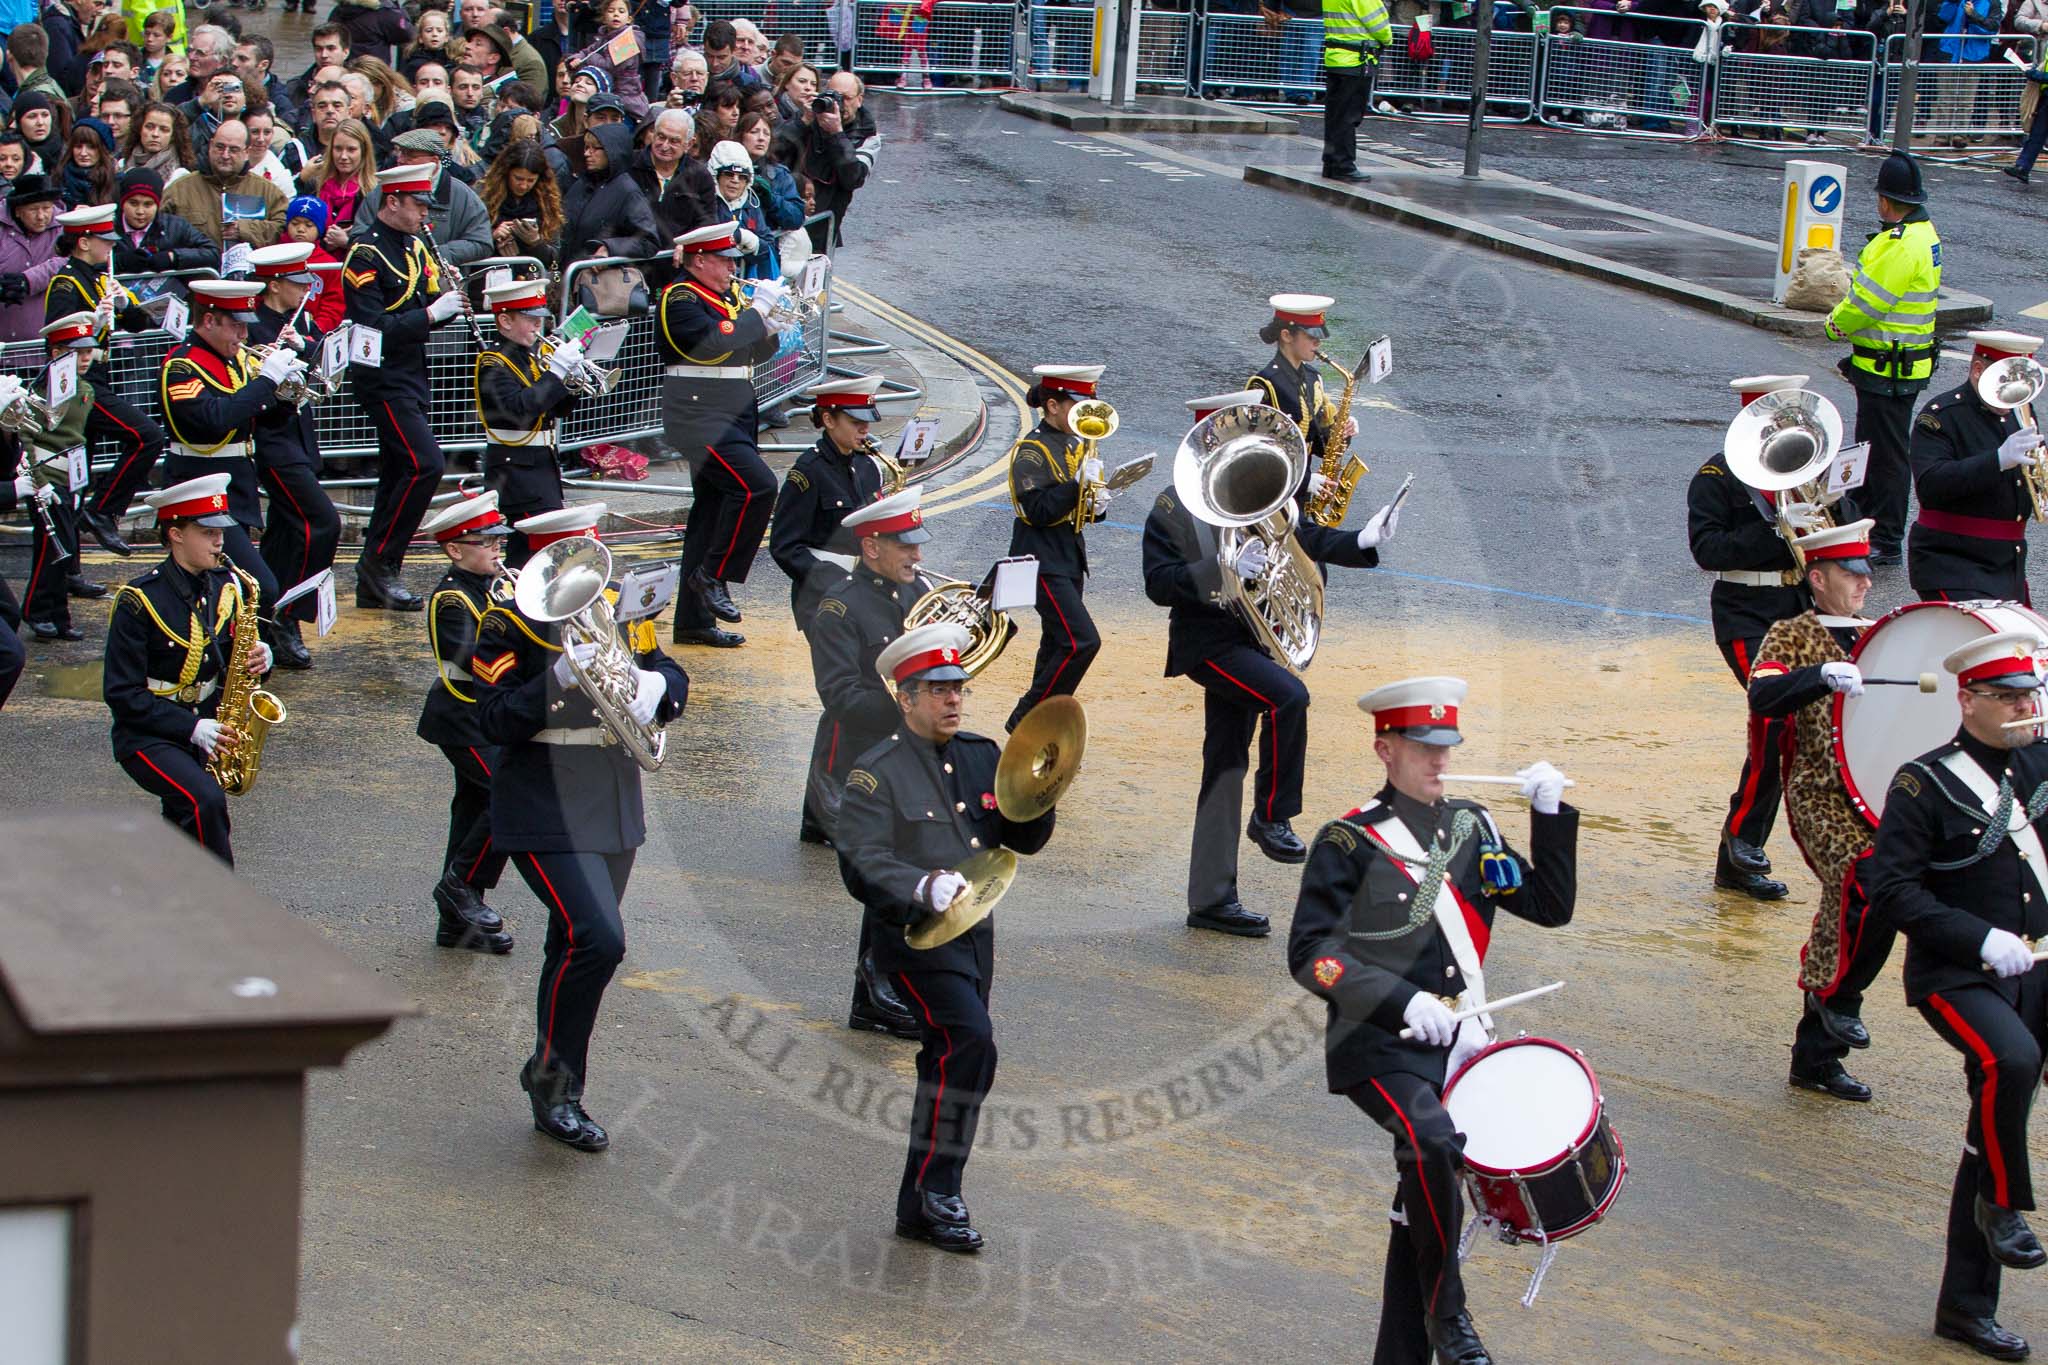 Lord Mayor's Show 2012: Entry 111 - Surbiton Royal British Legion Band..
Press stand opposite Mansion House, City of London,
London,
Greater London,
United Kingdom,
on 10 November 2012 at 11:56, image #1593